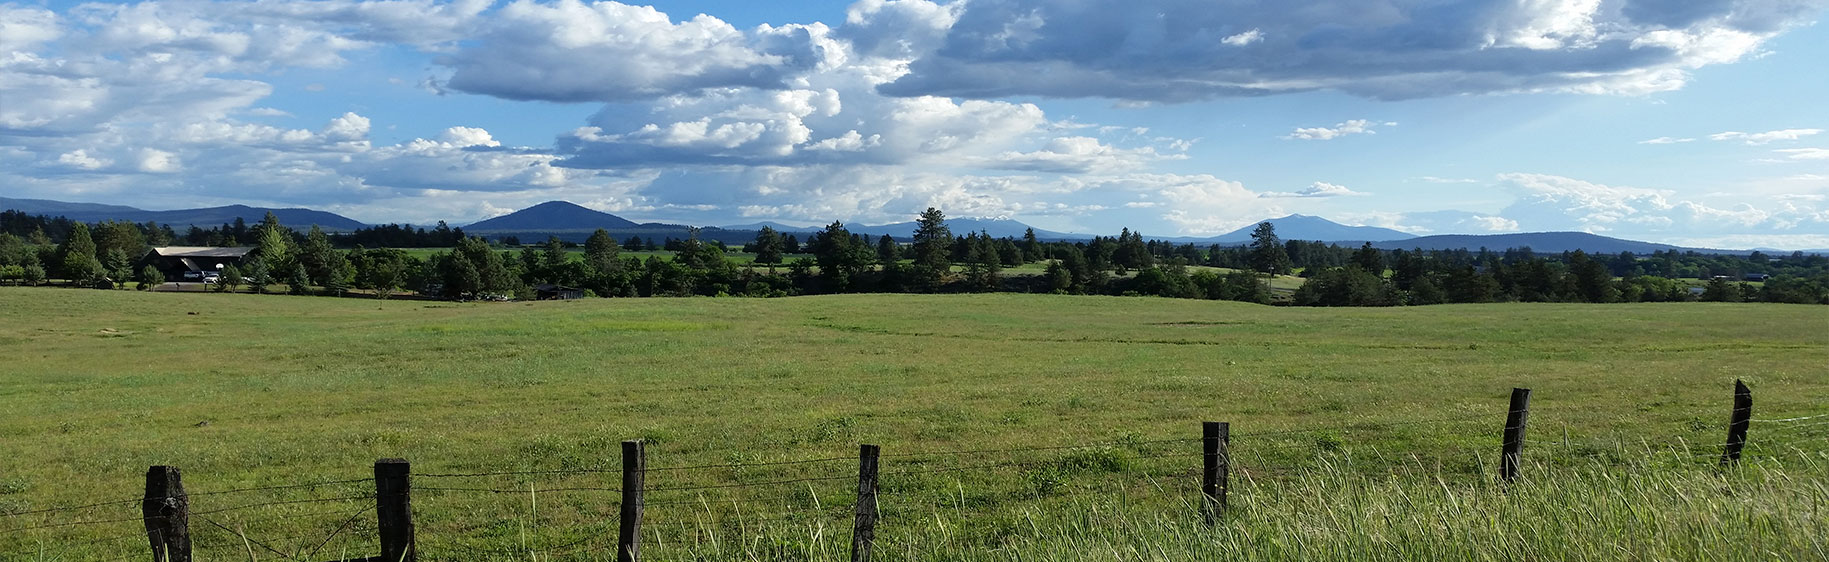 Banner picture of a large piece of land fenced. There is trees and mountains in the distance and lots of clouds in the sky.